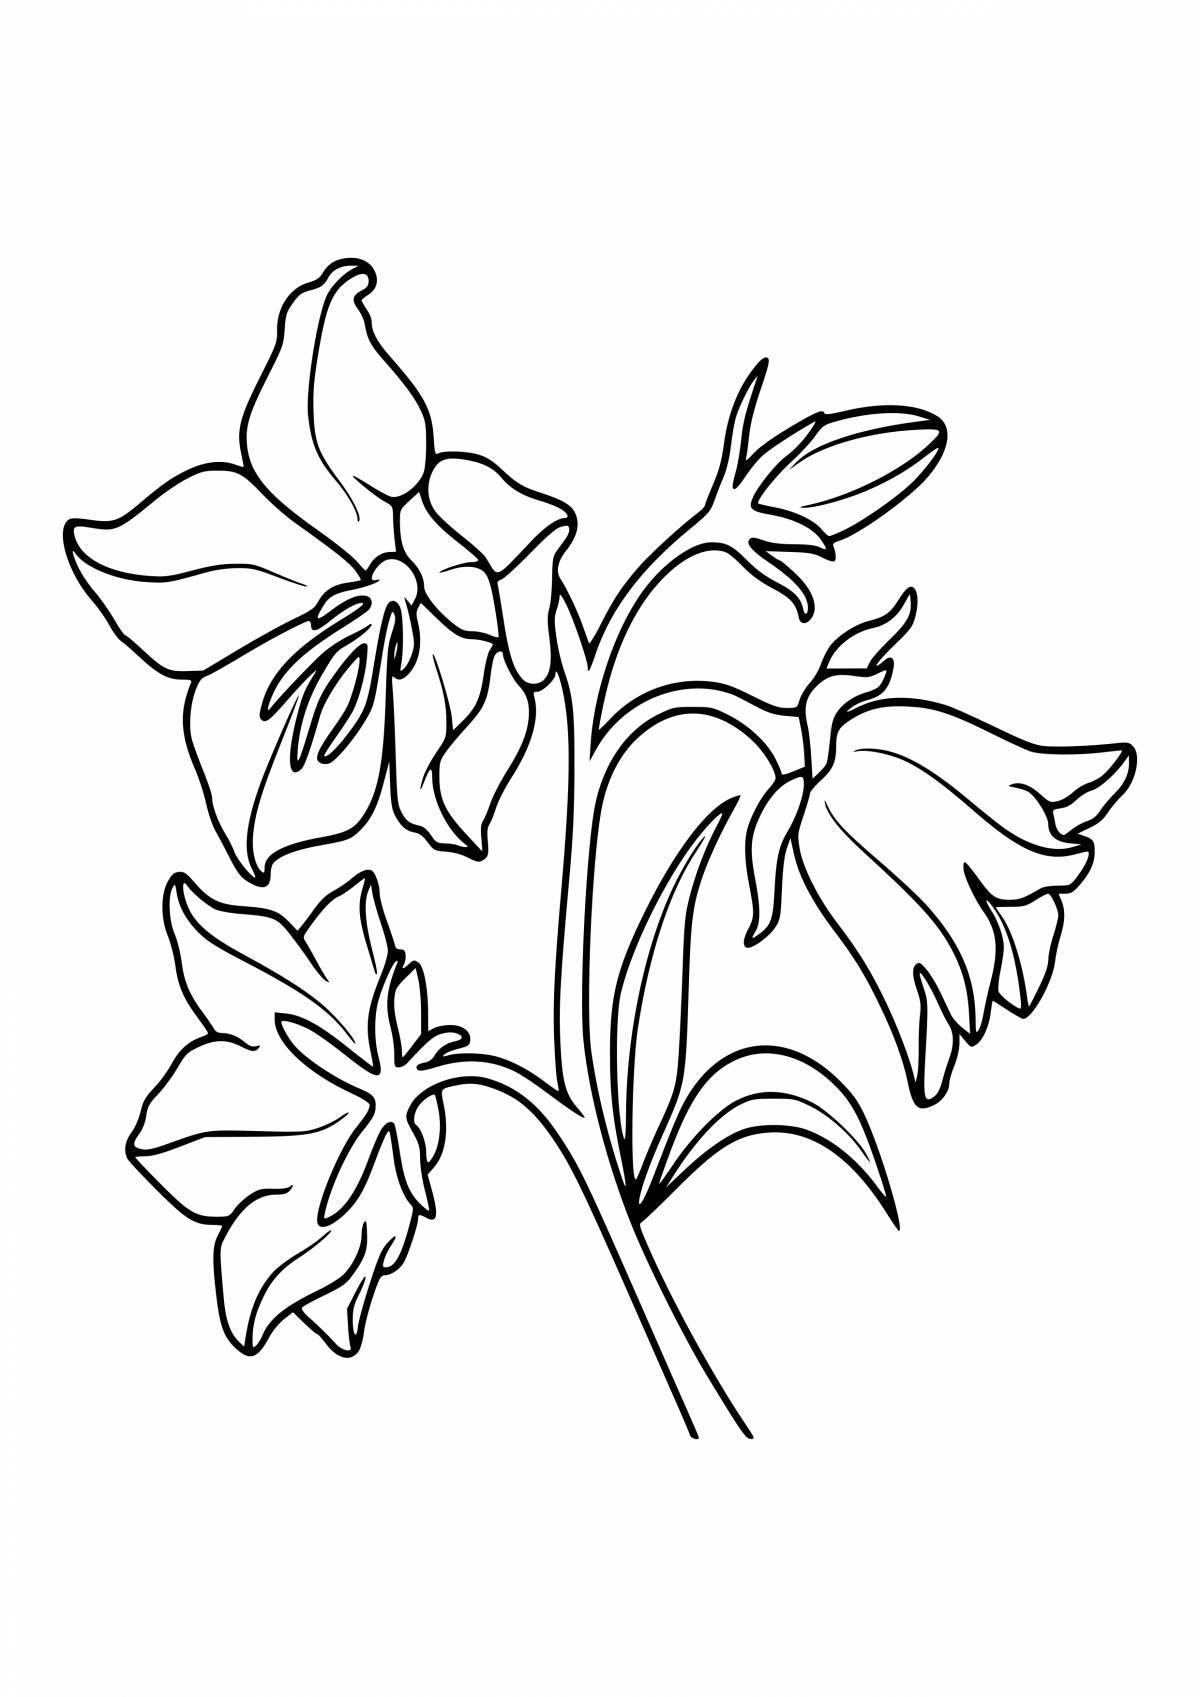 Playful lazoric flower coloring page